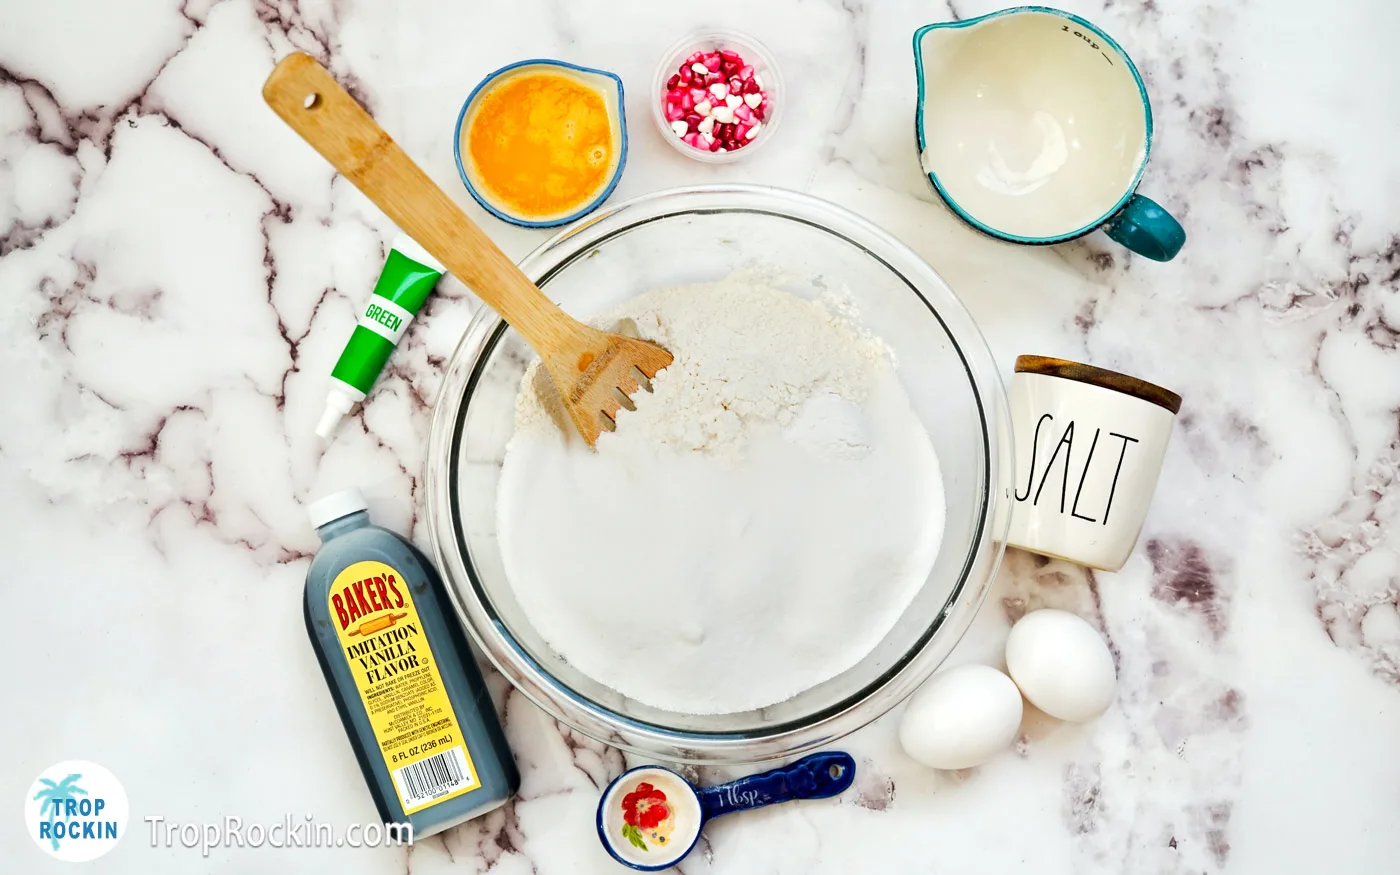 All cookie dough dry ingredients in a large mixing bowl with a wooden spoon.